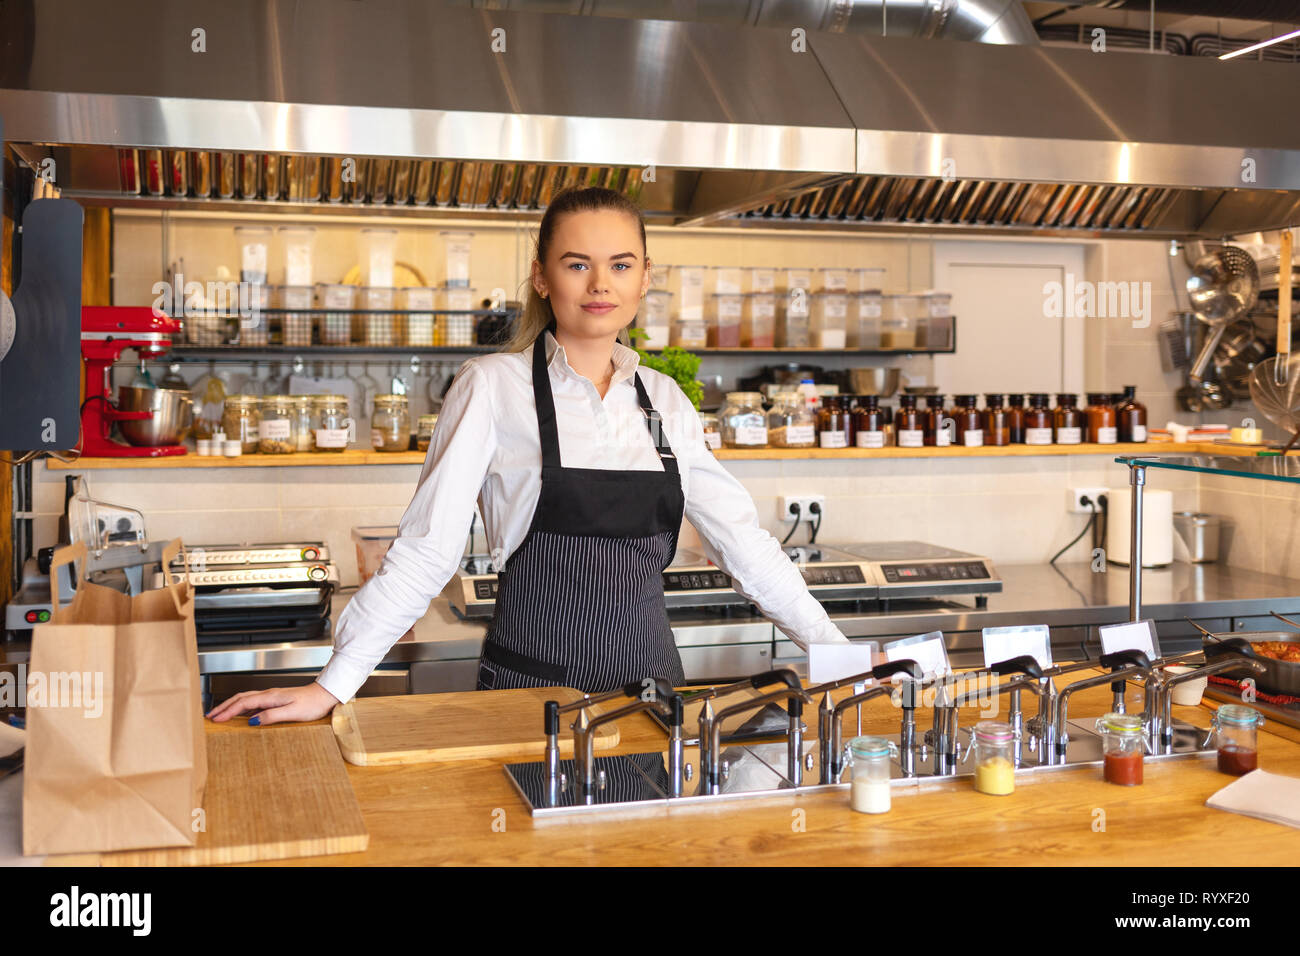 Successful owner standing behind counter in small eatery restaurant Stock Photo